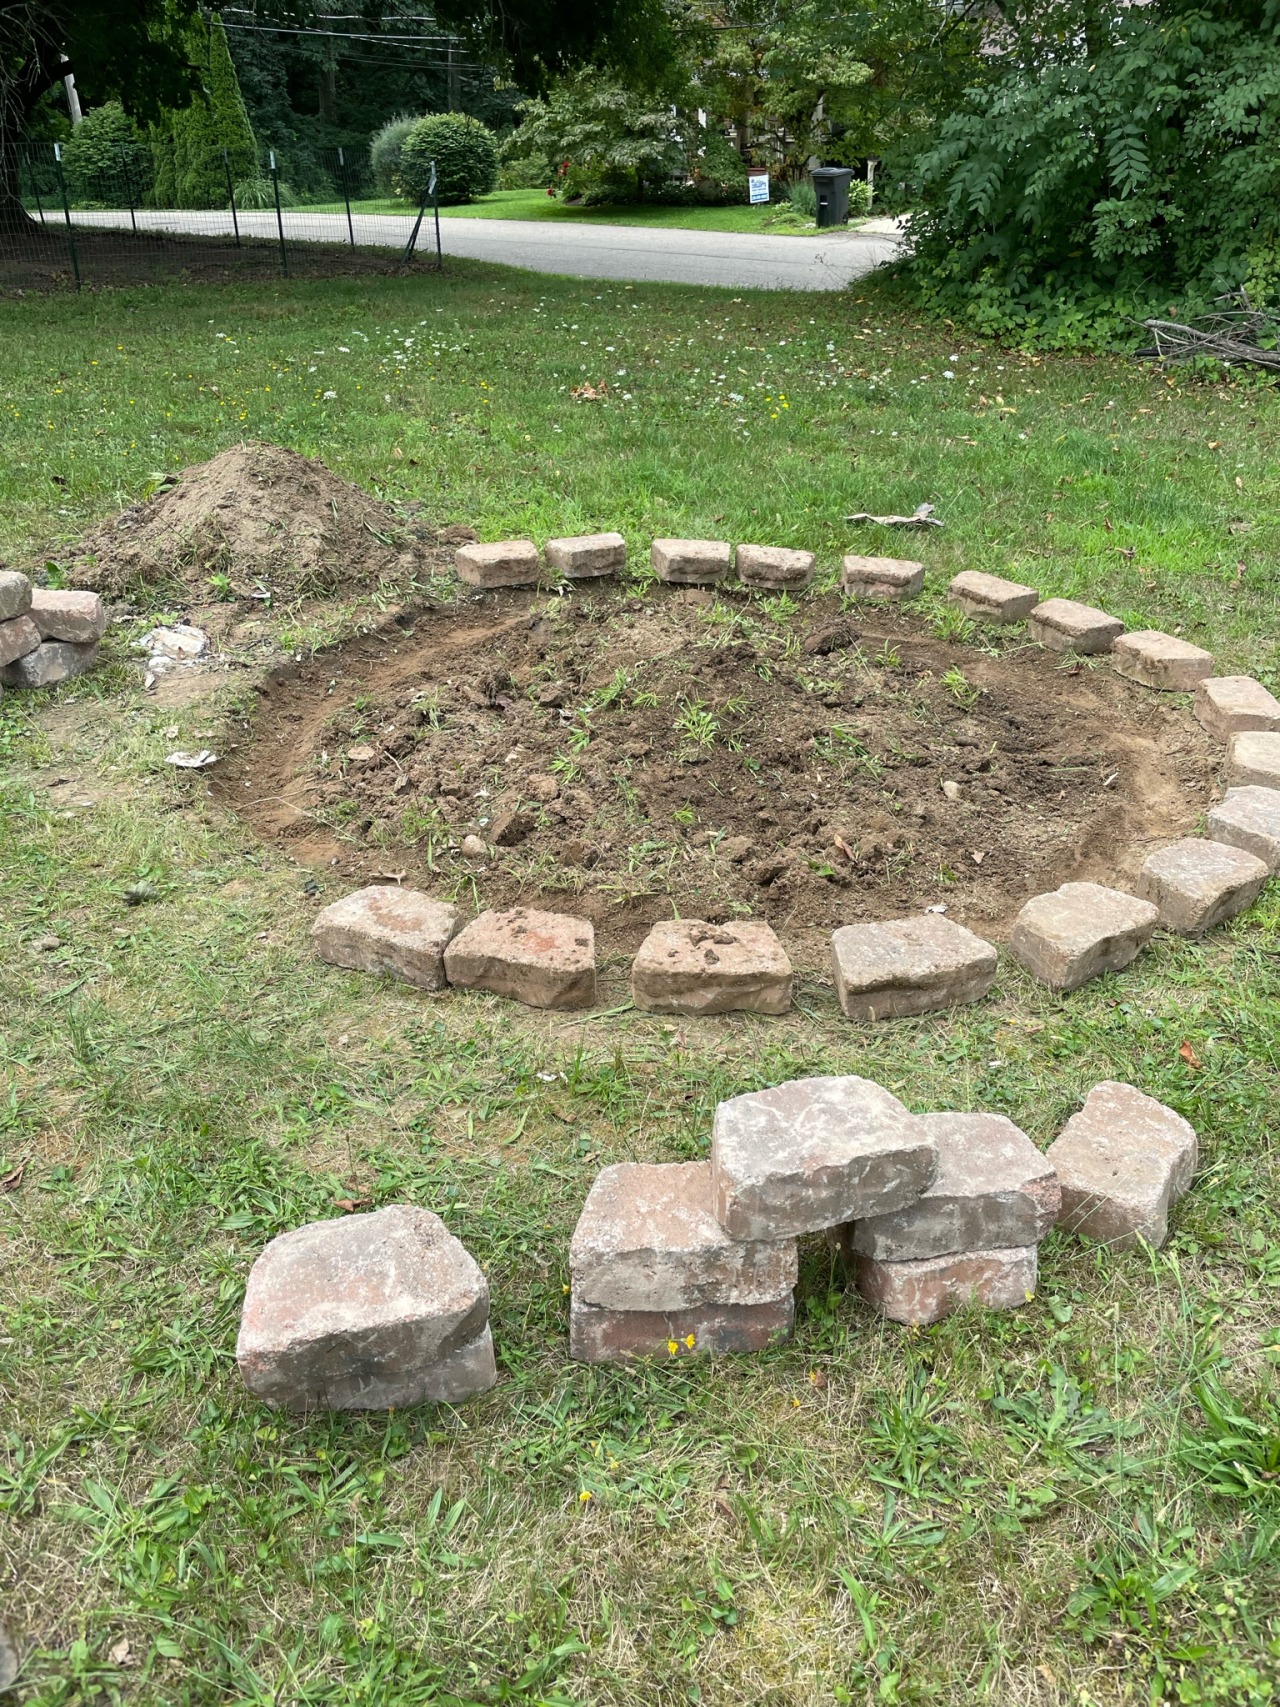 Worked on the fire pit today, mostly level except for the end( used the level the whole circle anddd it’s not level to the beginning of the circle🙄🤦🏼‍♂️) then mowed the lawn. Was a good productive day🤘🏼